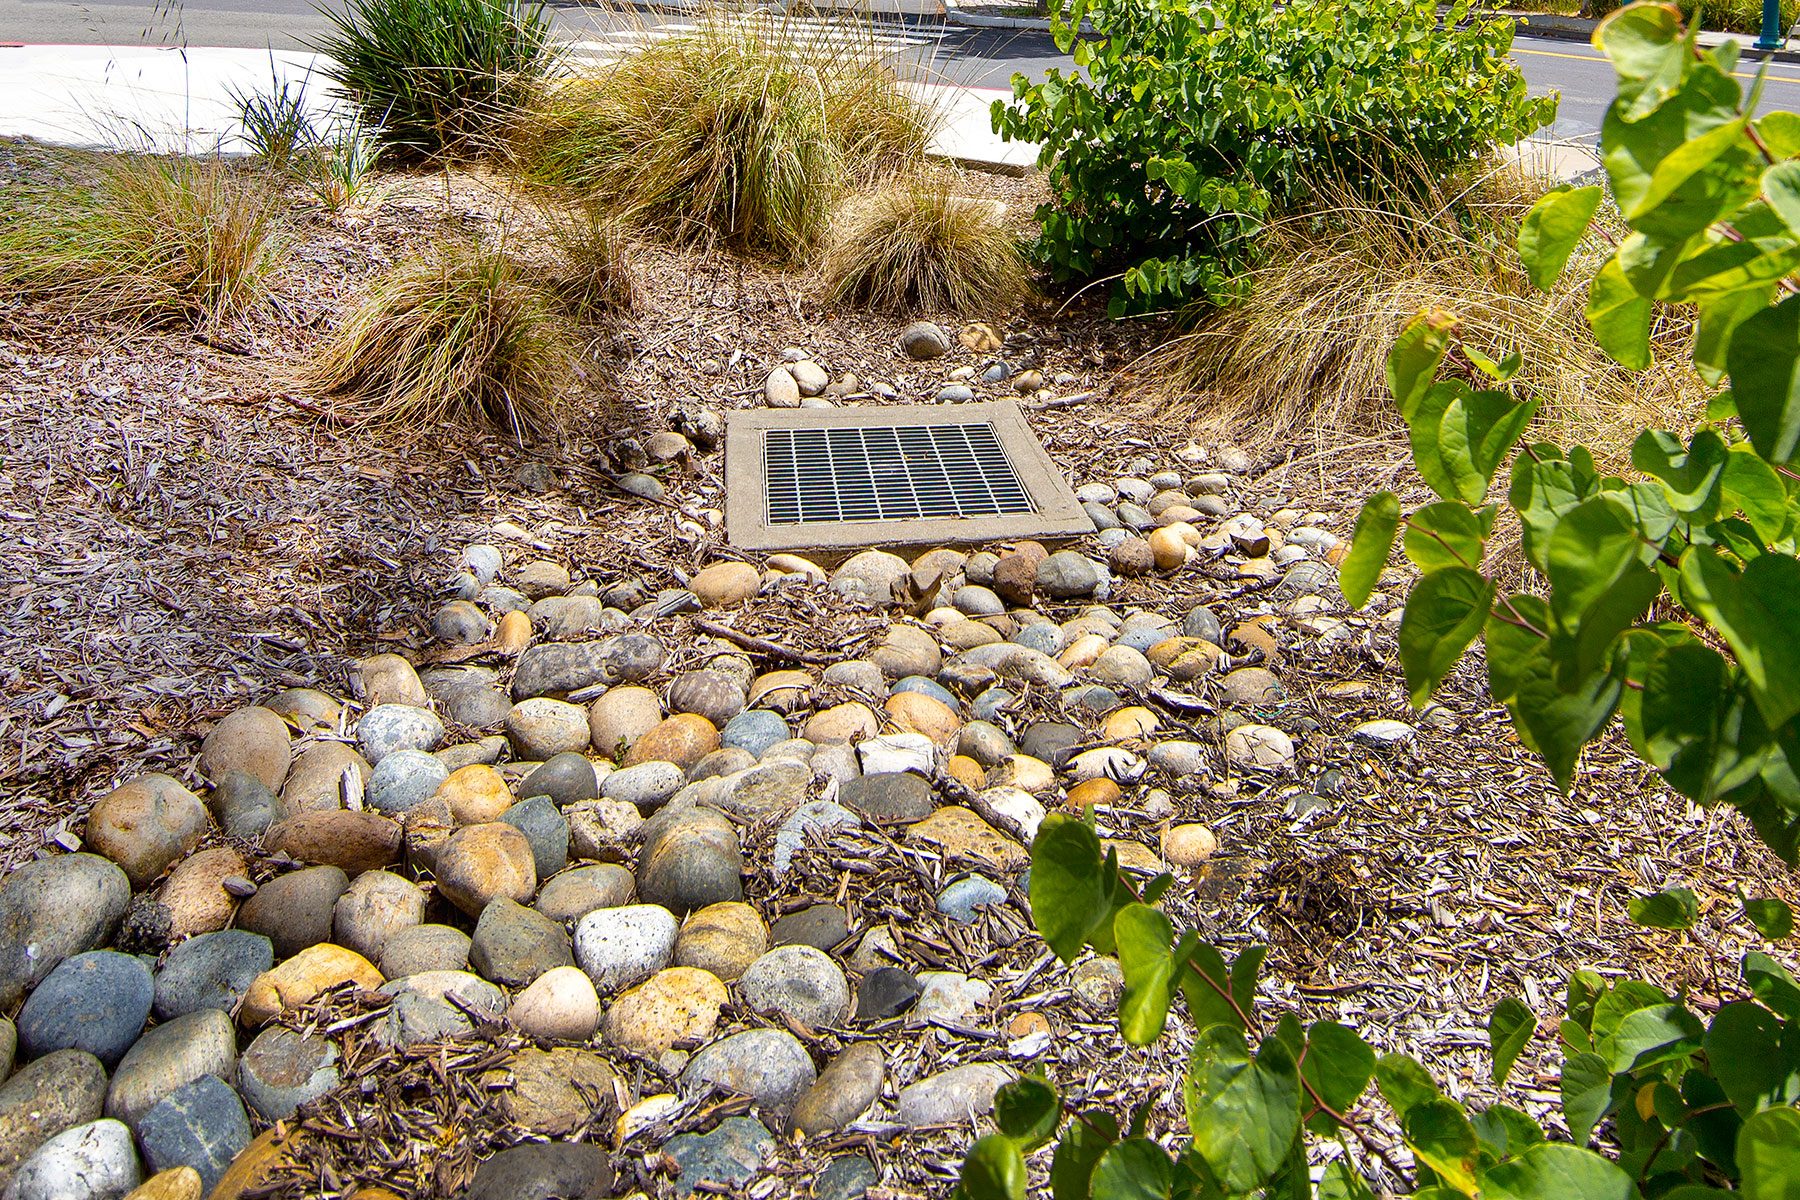 A Bioswale In A Public Park Constructed Of Dirt, Tree Bark, Rocks And Drought Resistant Plants